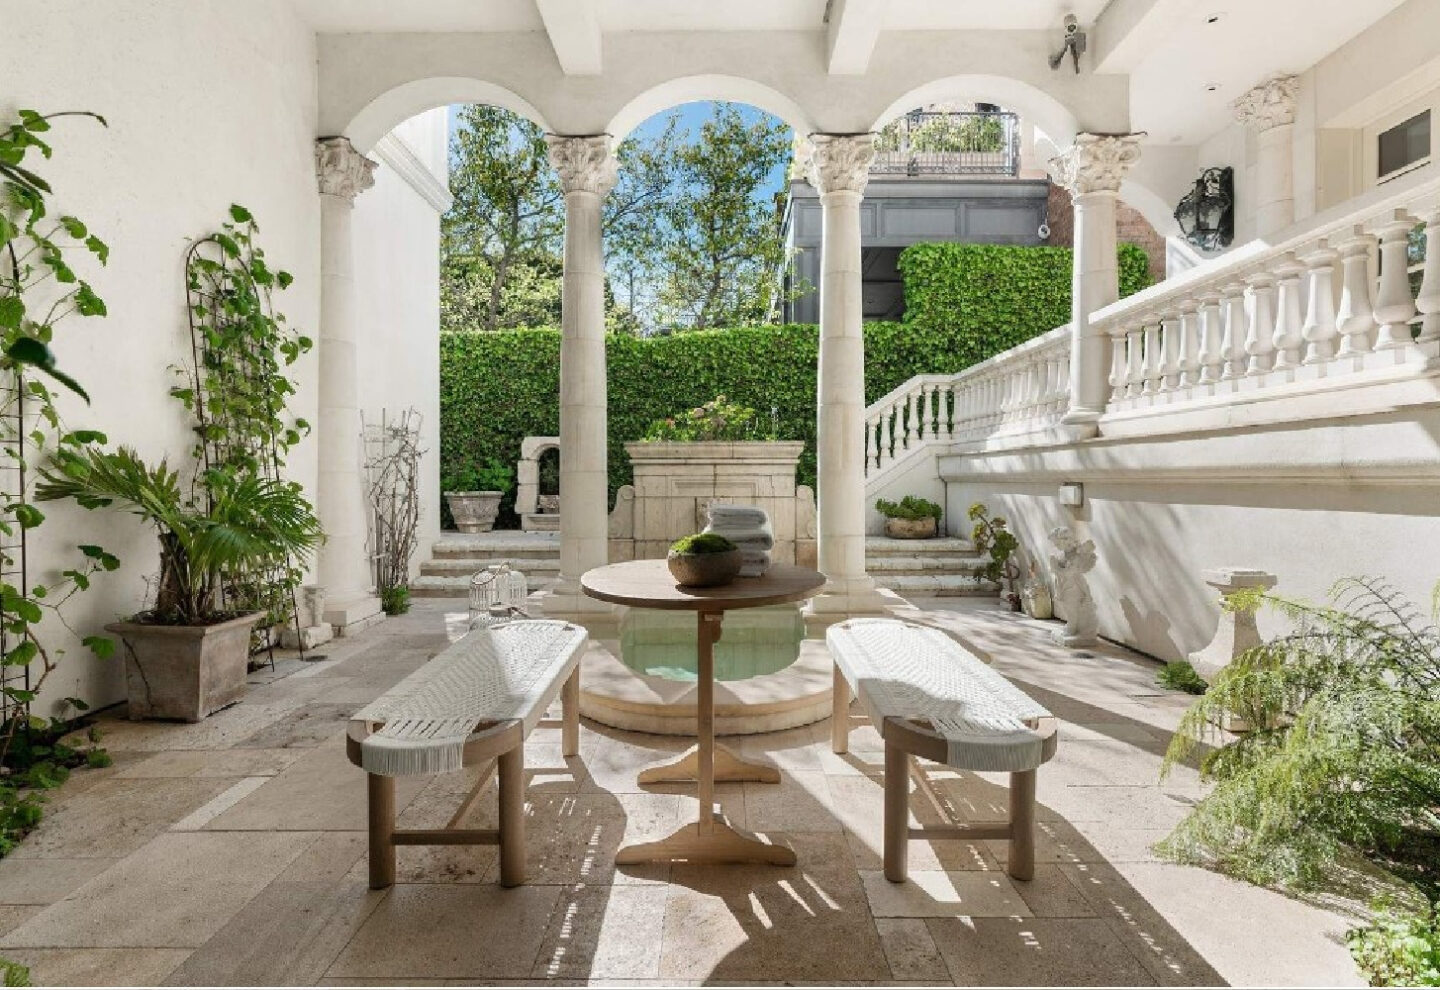 Elegant and architecturally magnificent loggia in a French inspired San Francisco mansion. #loggia #frenchchateau